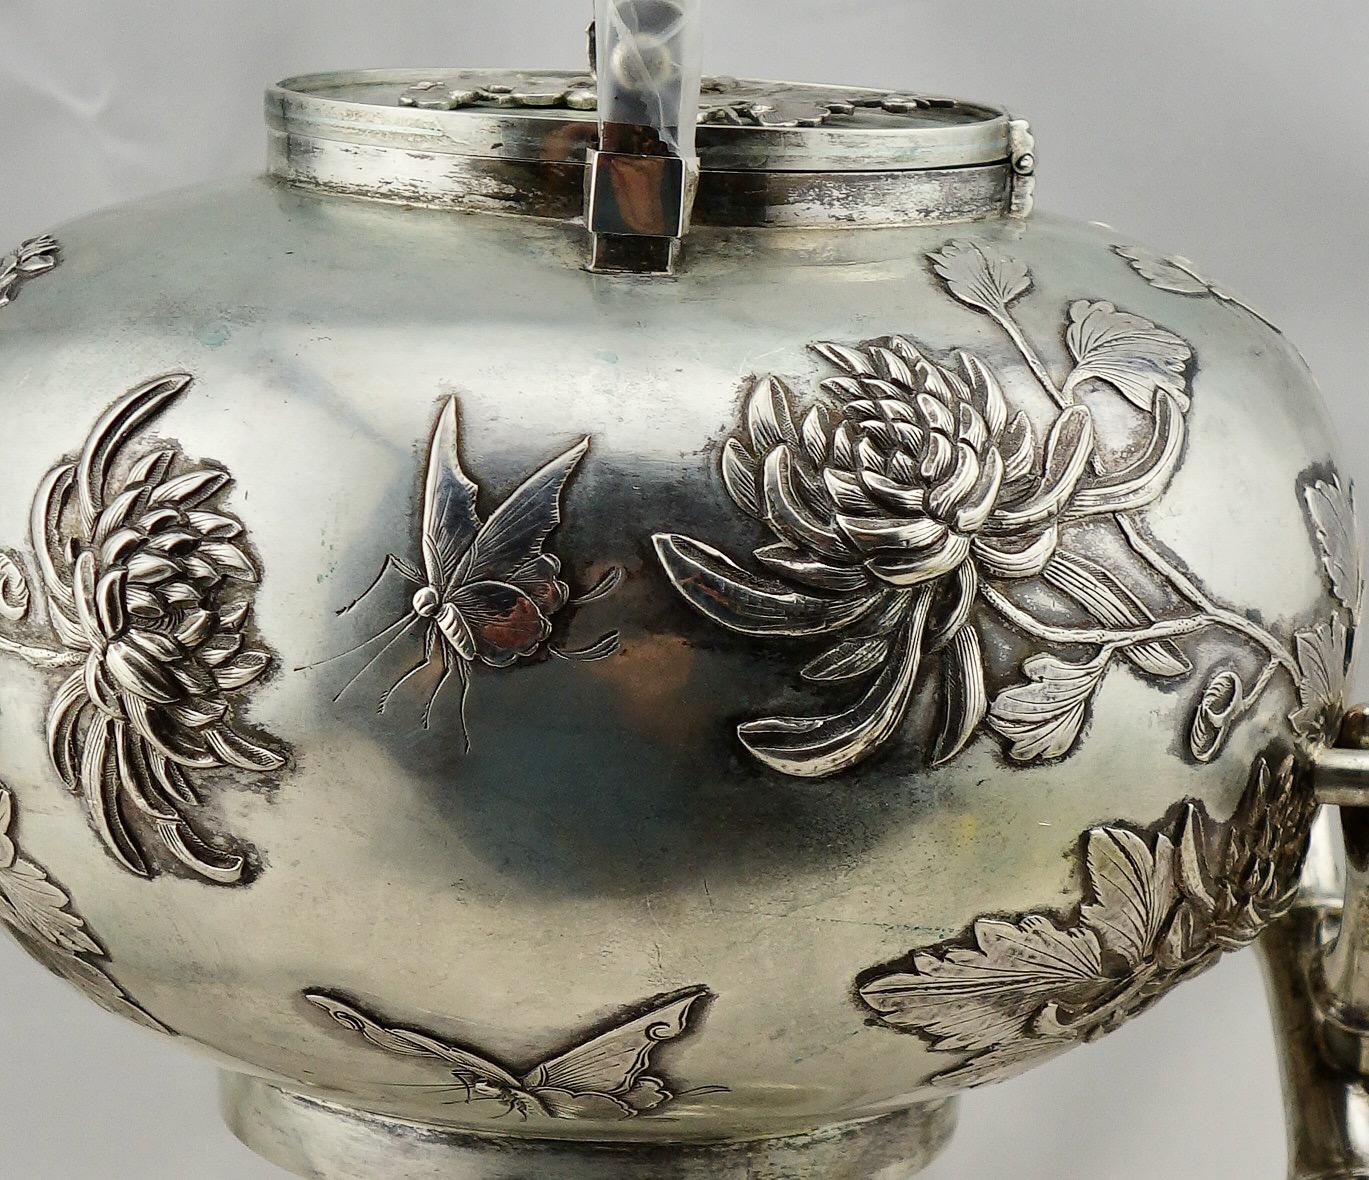 Hand-Crafted Chinese Export Silver Teapot or Kettle on a Stand by Leeching, circa 1900 For Sale